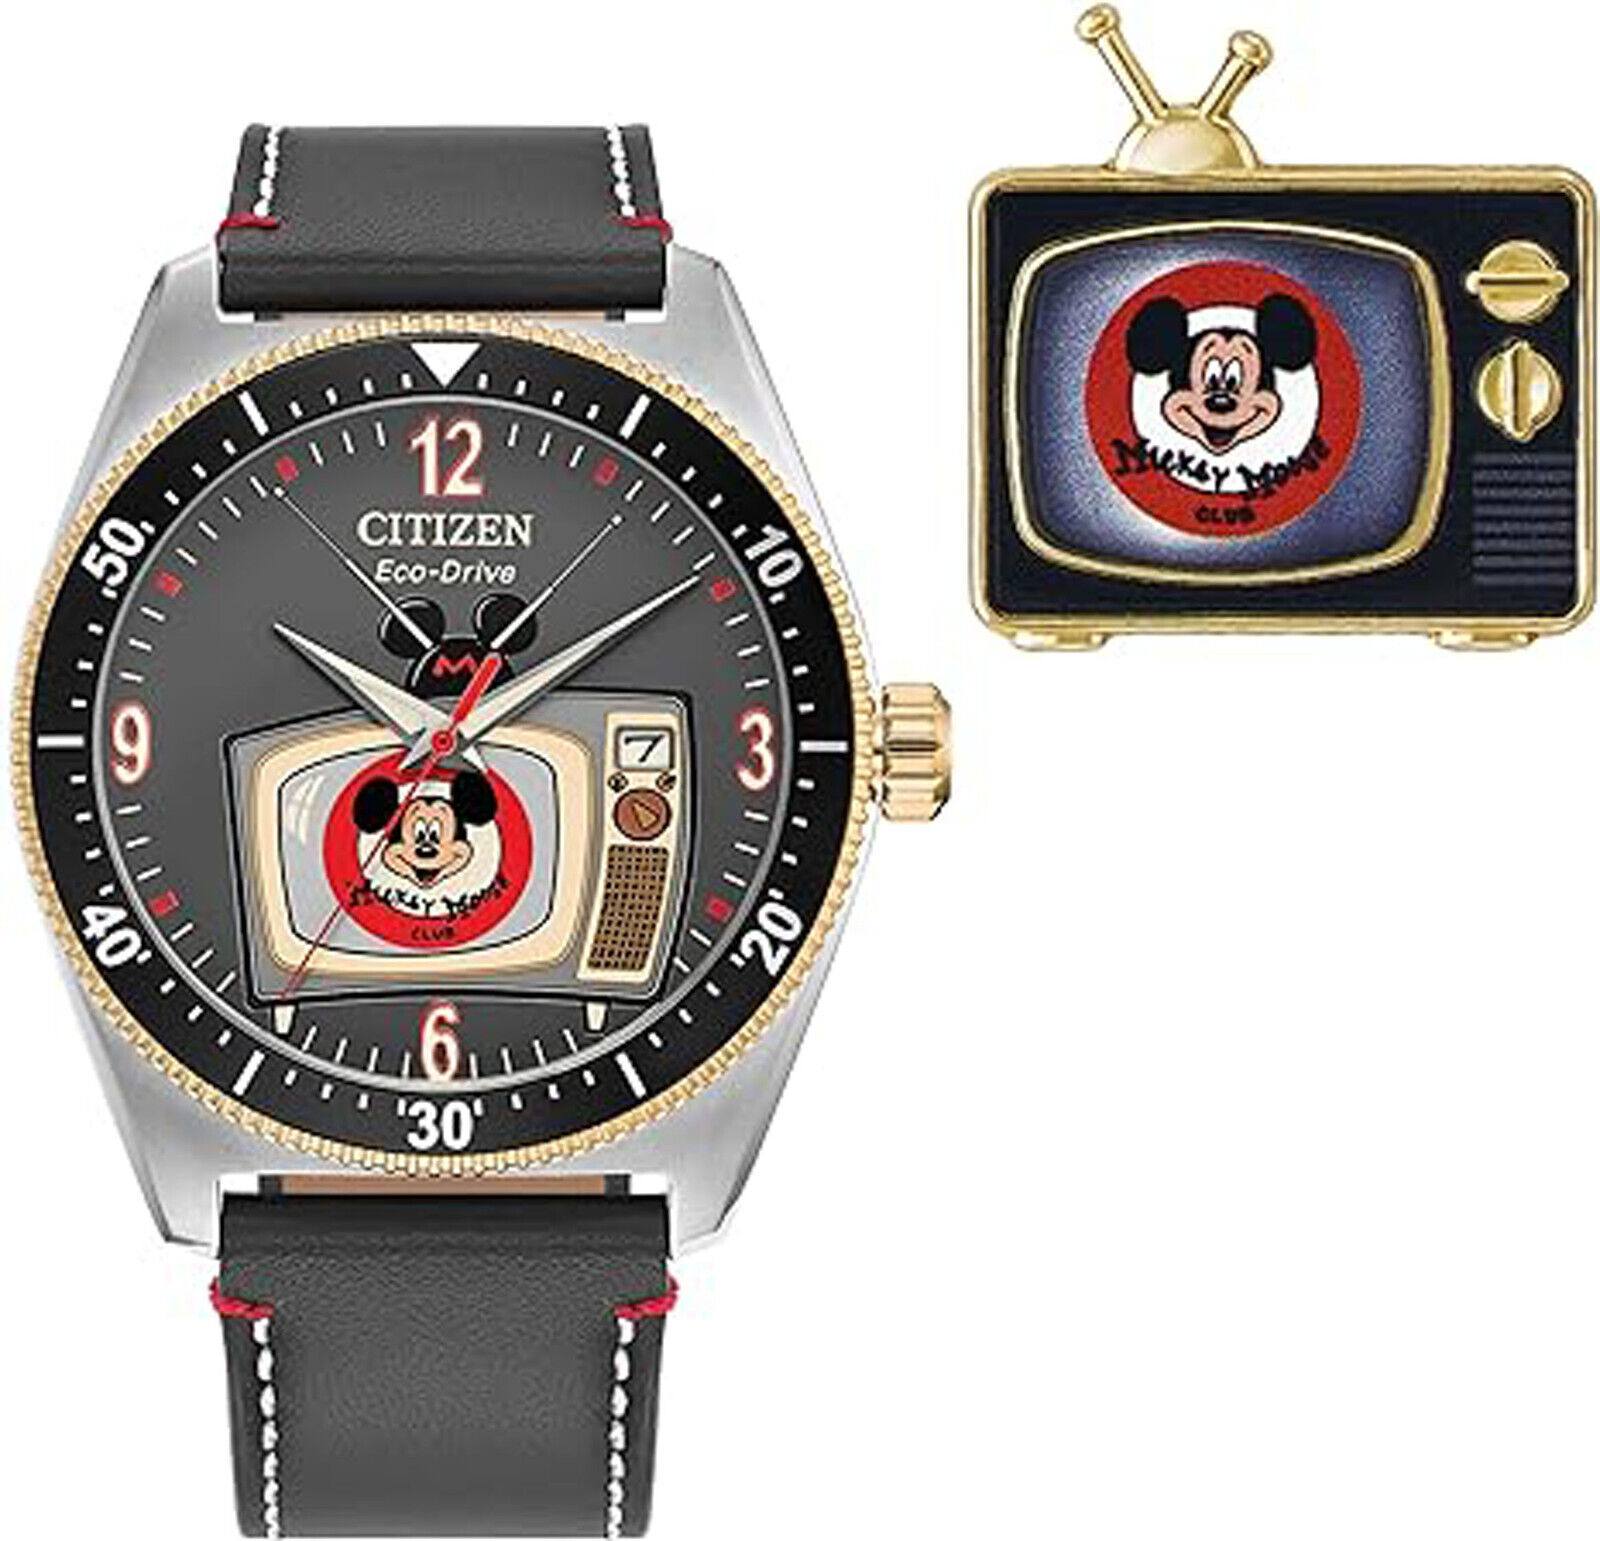 Citizen Eco-Drive Special Edition Disney 100 Mickey Mouse Club Watch and Pin Box